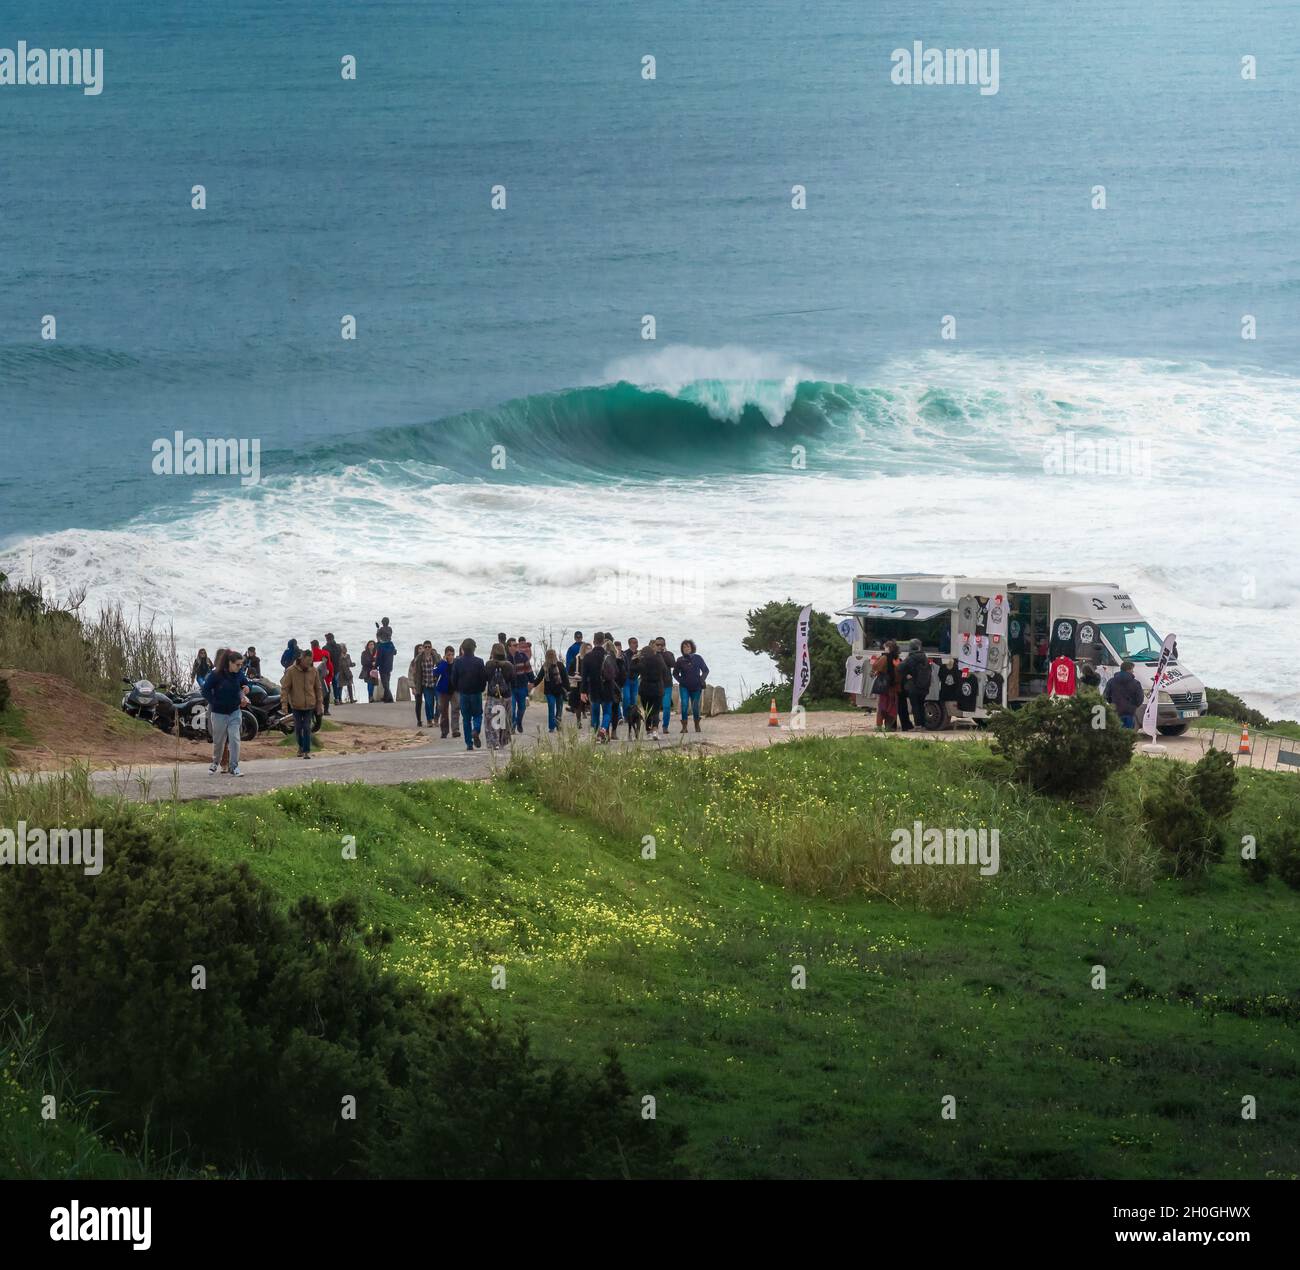 People Watching the Big Waves in Nazare - Nazare, Portugal Stock Photo